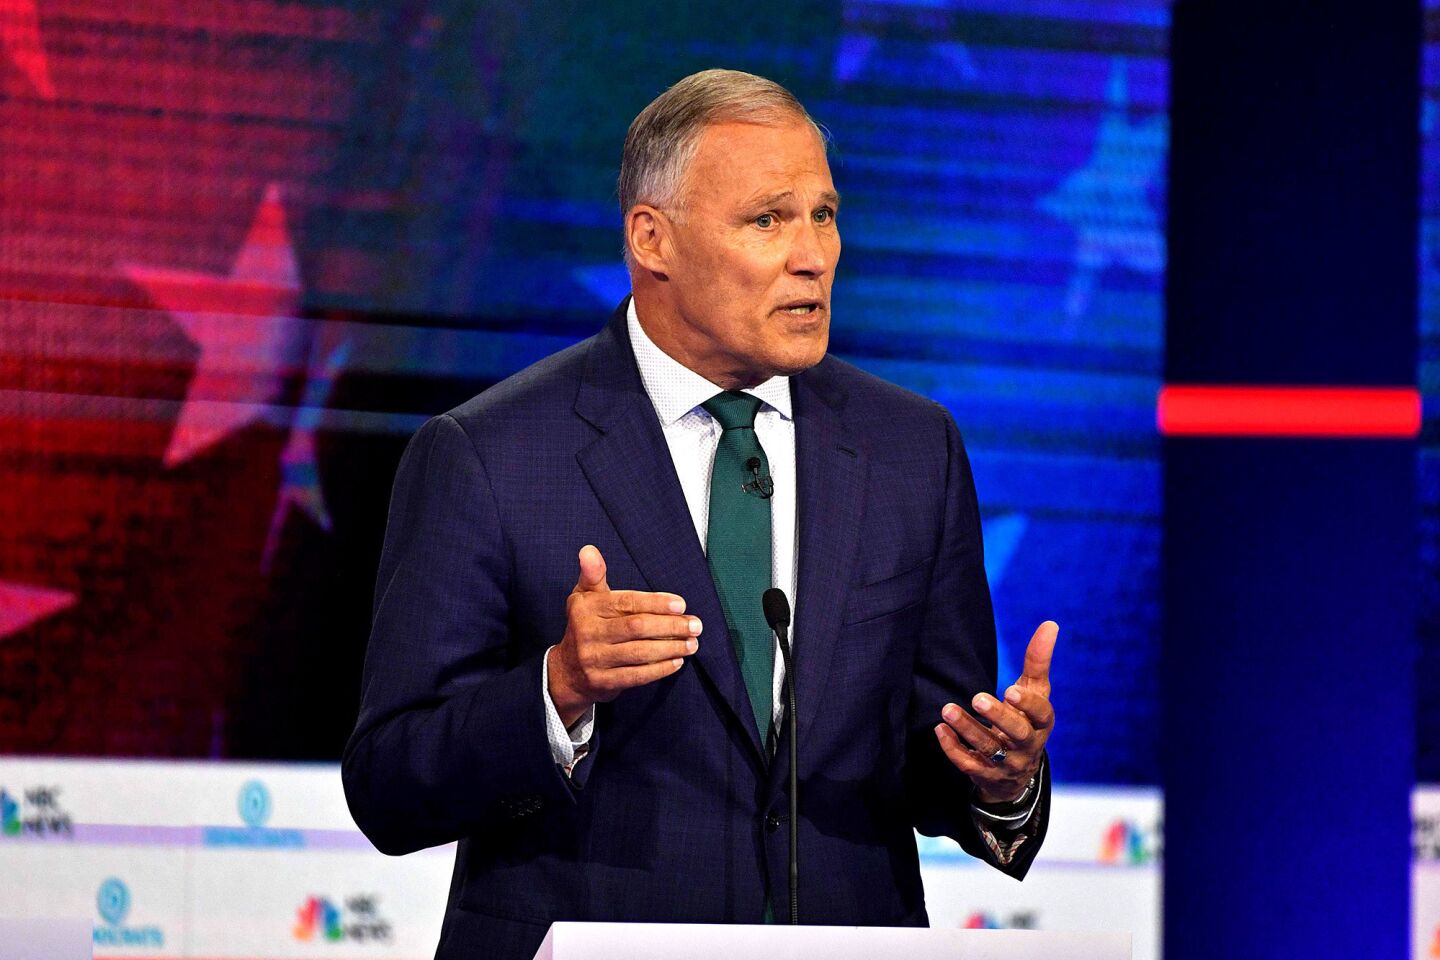 Washington Gov. Jay Inslee reiterated his call for heavy investment in green technologies as a way to create jobs while slashing carbon emissions.